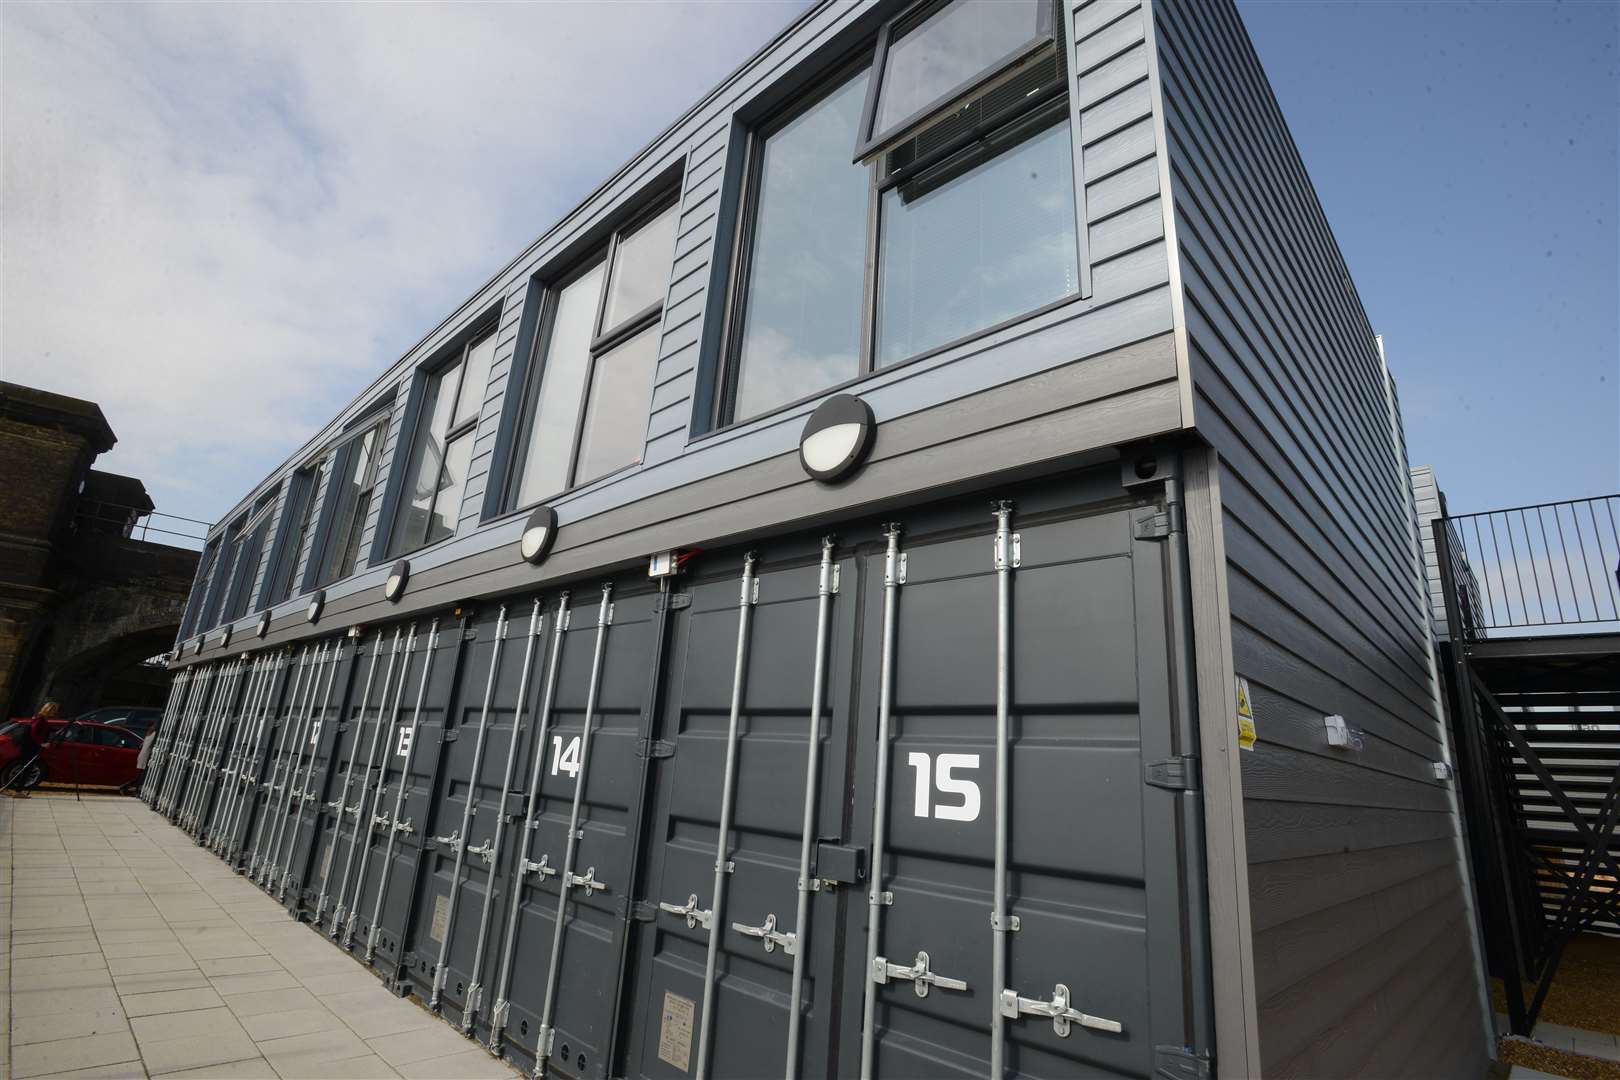 The Innovation Studios in Strood are offices built on top of shipping containers. Picture: Gary Browne